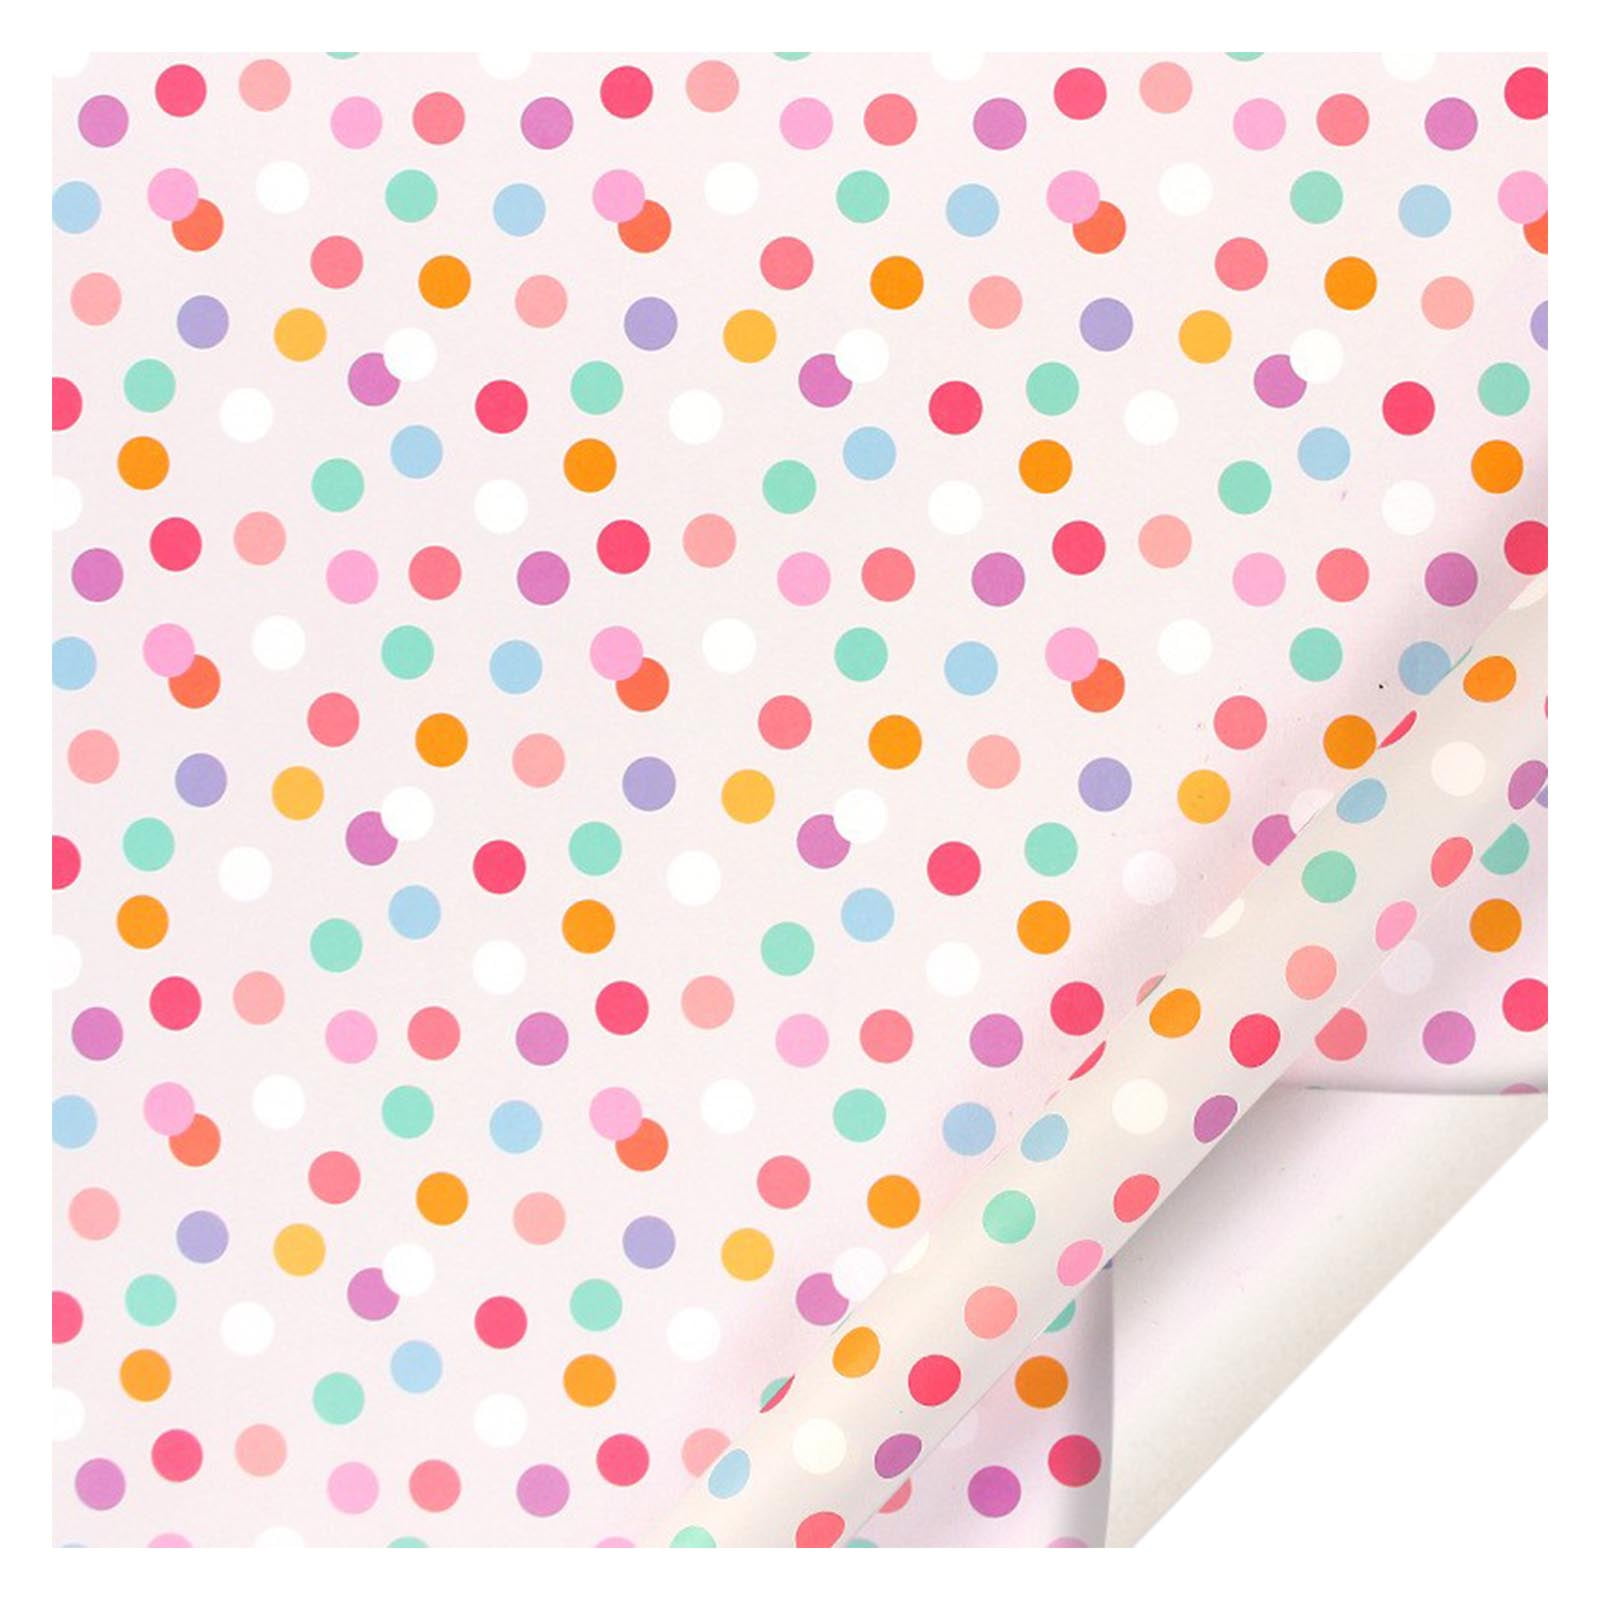 Travelwant All Occasion Wrapping Paper Bundle Solids, Polka Dots & Stripes  for Birthdays, Easter, Mothers Day, Weddings, Baby Showers Graduations